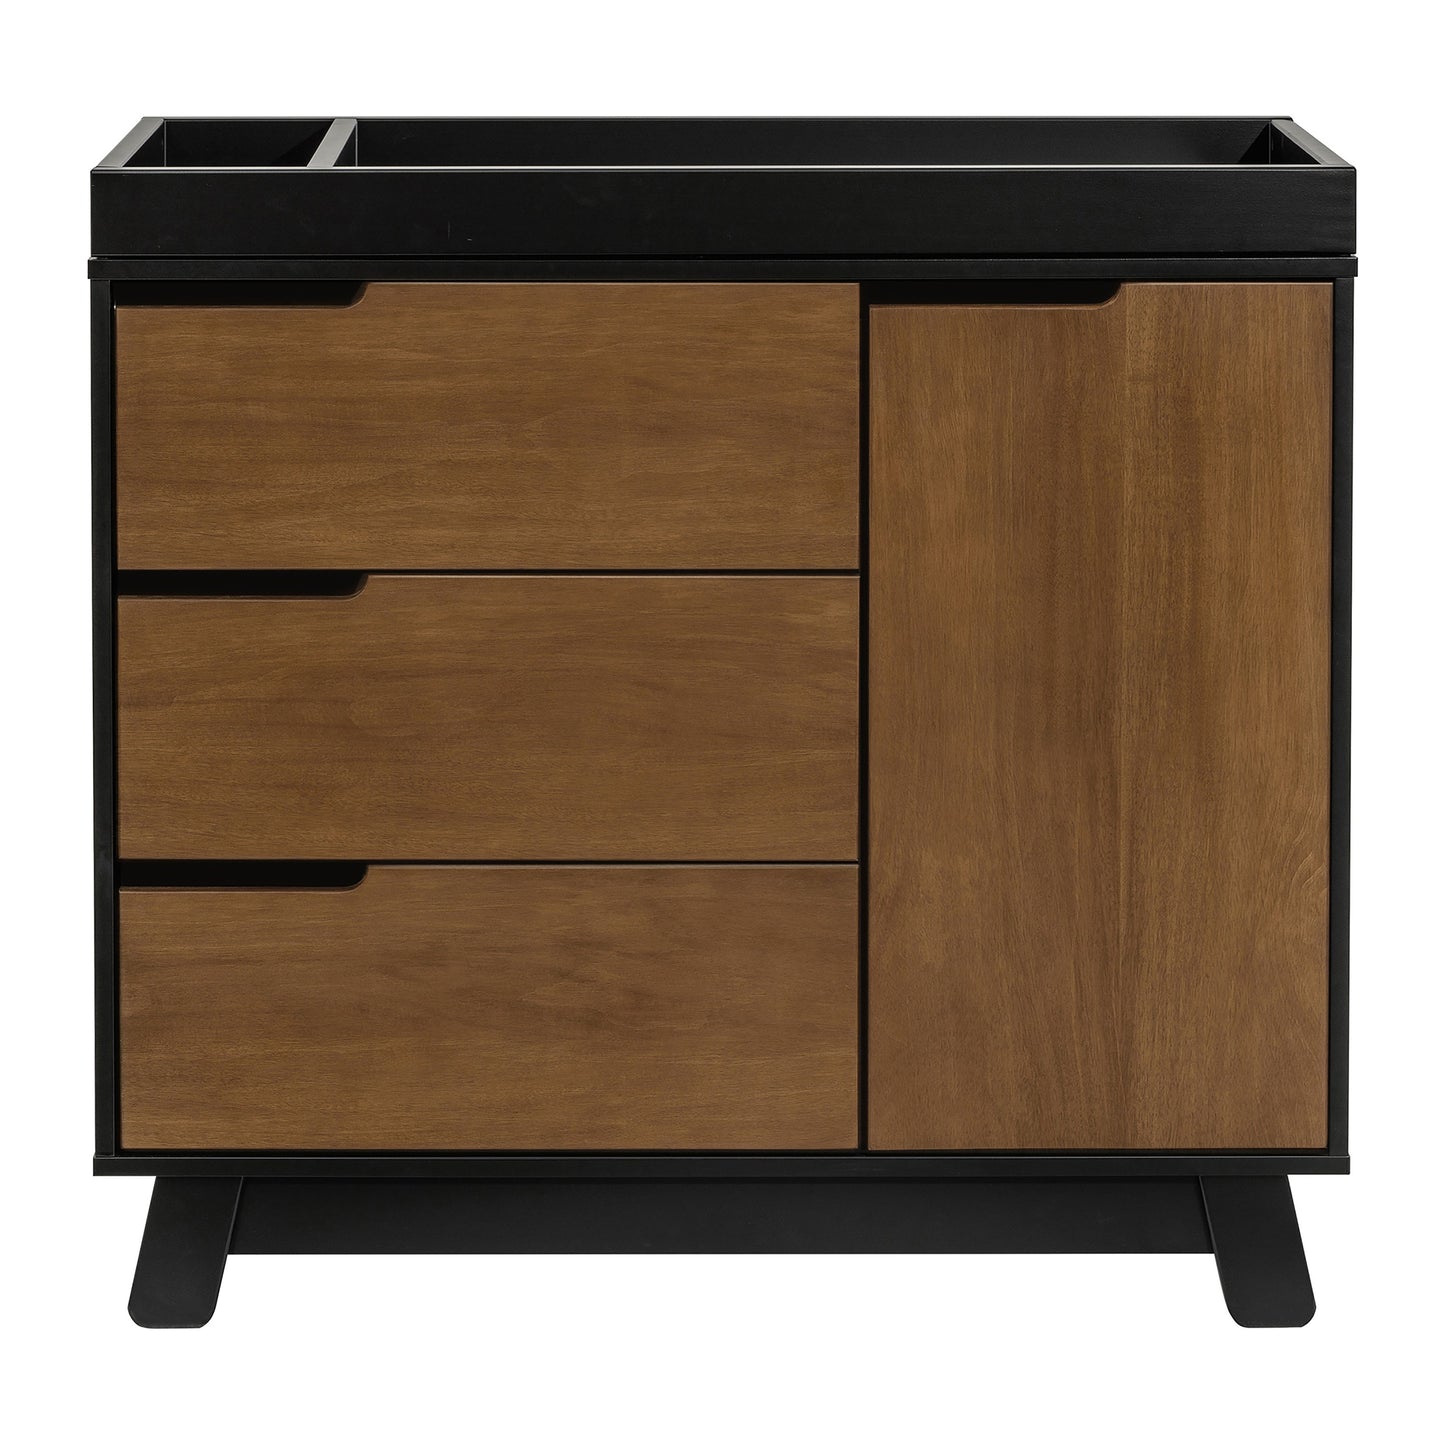 Hudson 3-Drawer Changer Dresser with Changing Tray